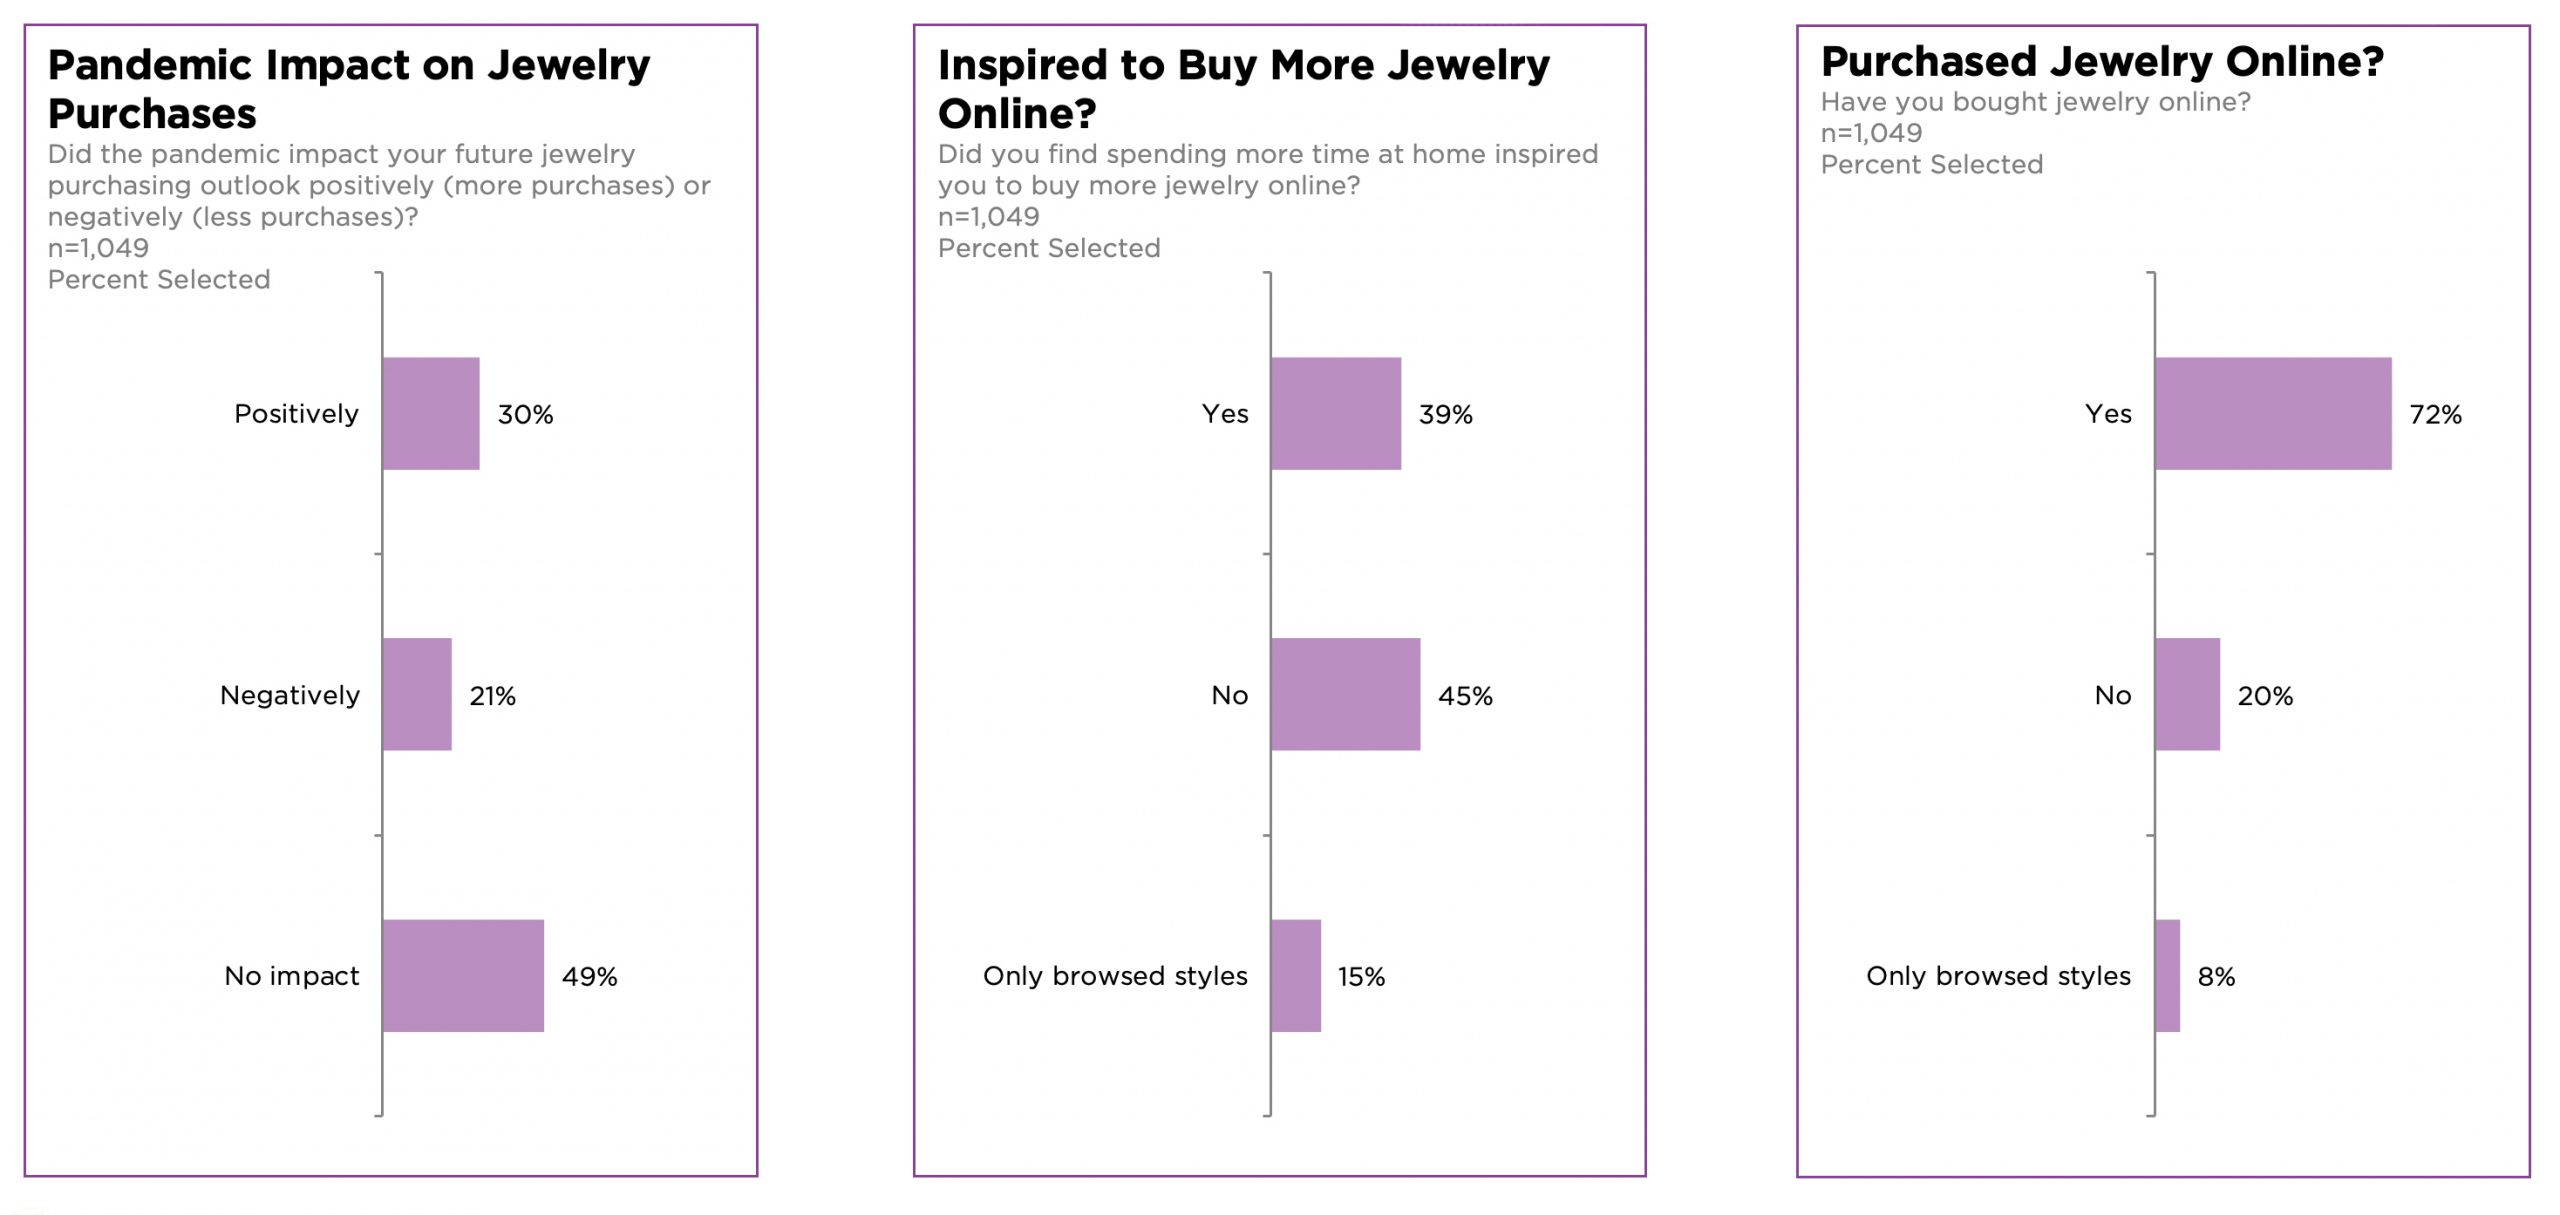 Survey finds pandemic has positively impacted jewelry industry